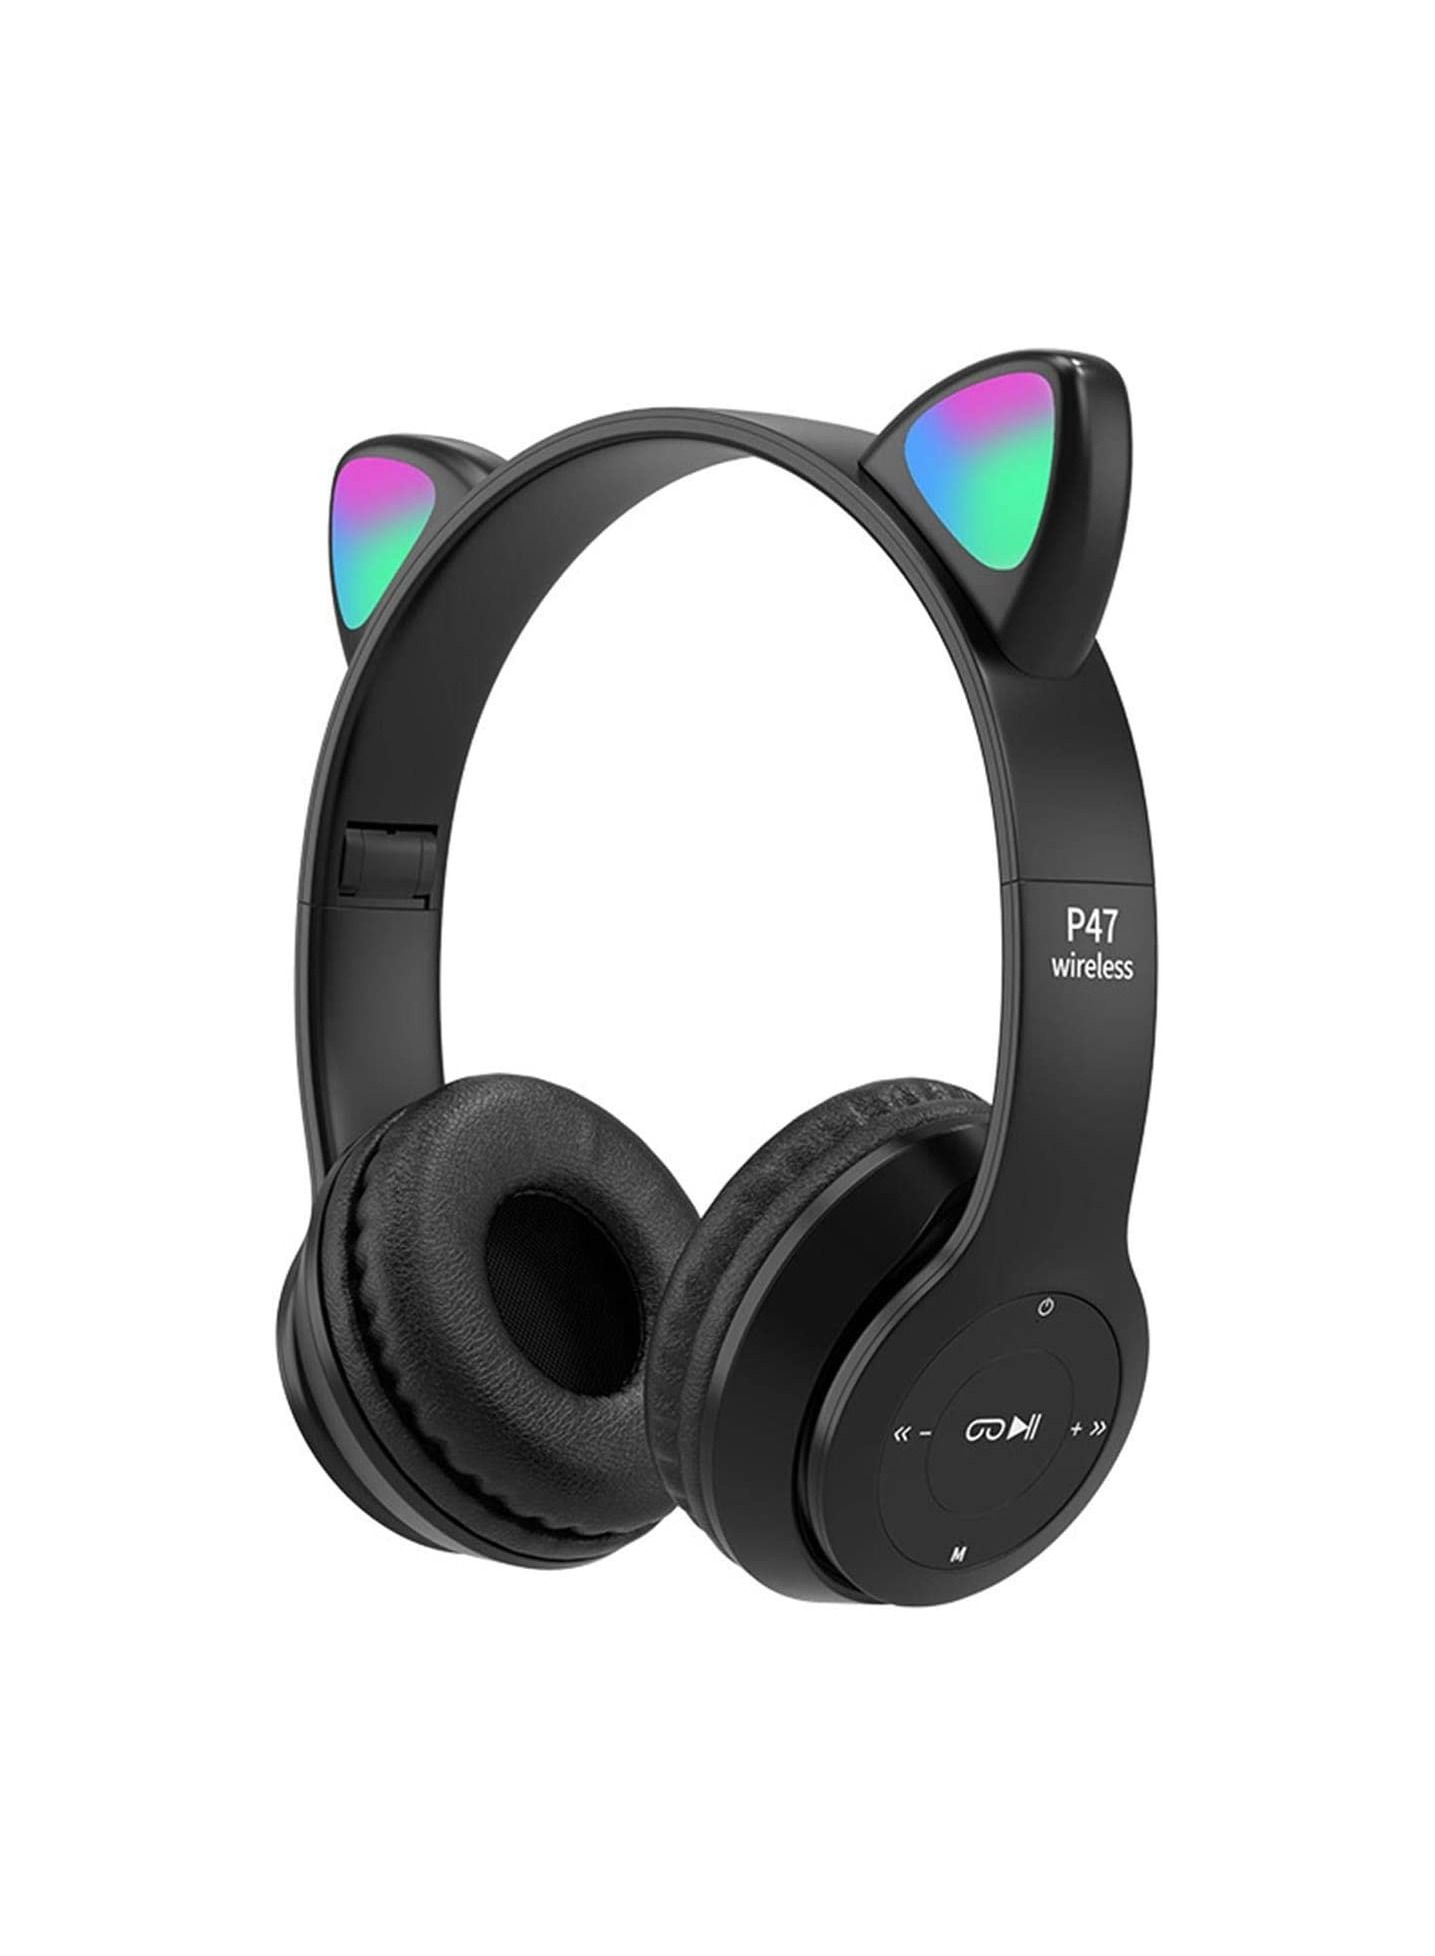 Cat Wired and Wireless Over Ear Headphones, Black - P47M